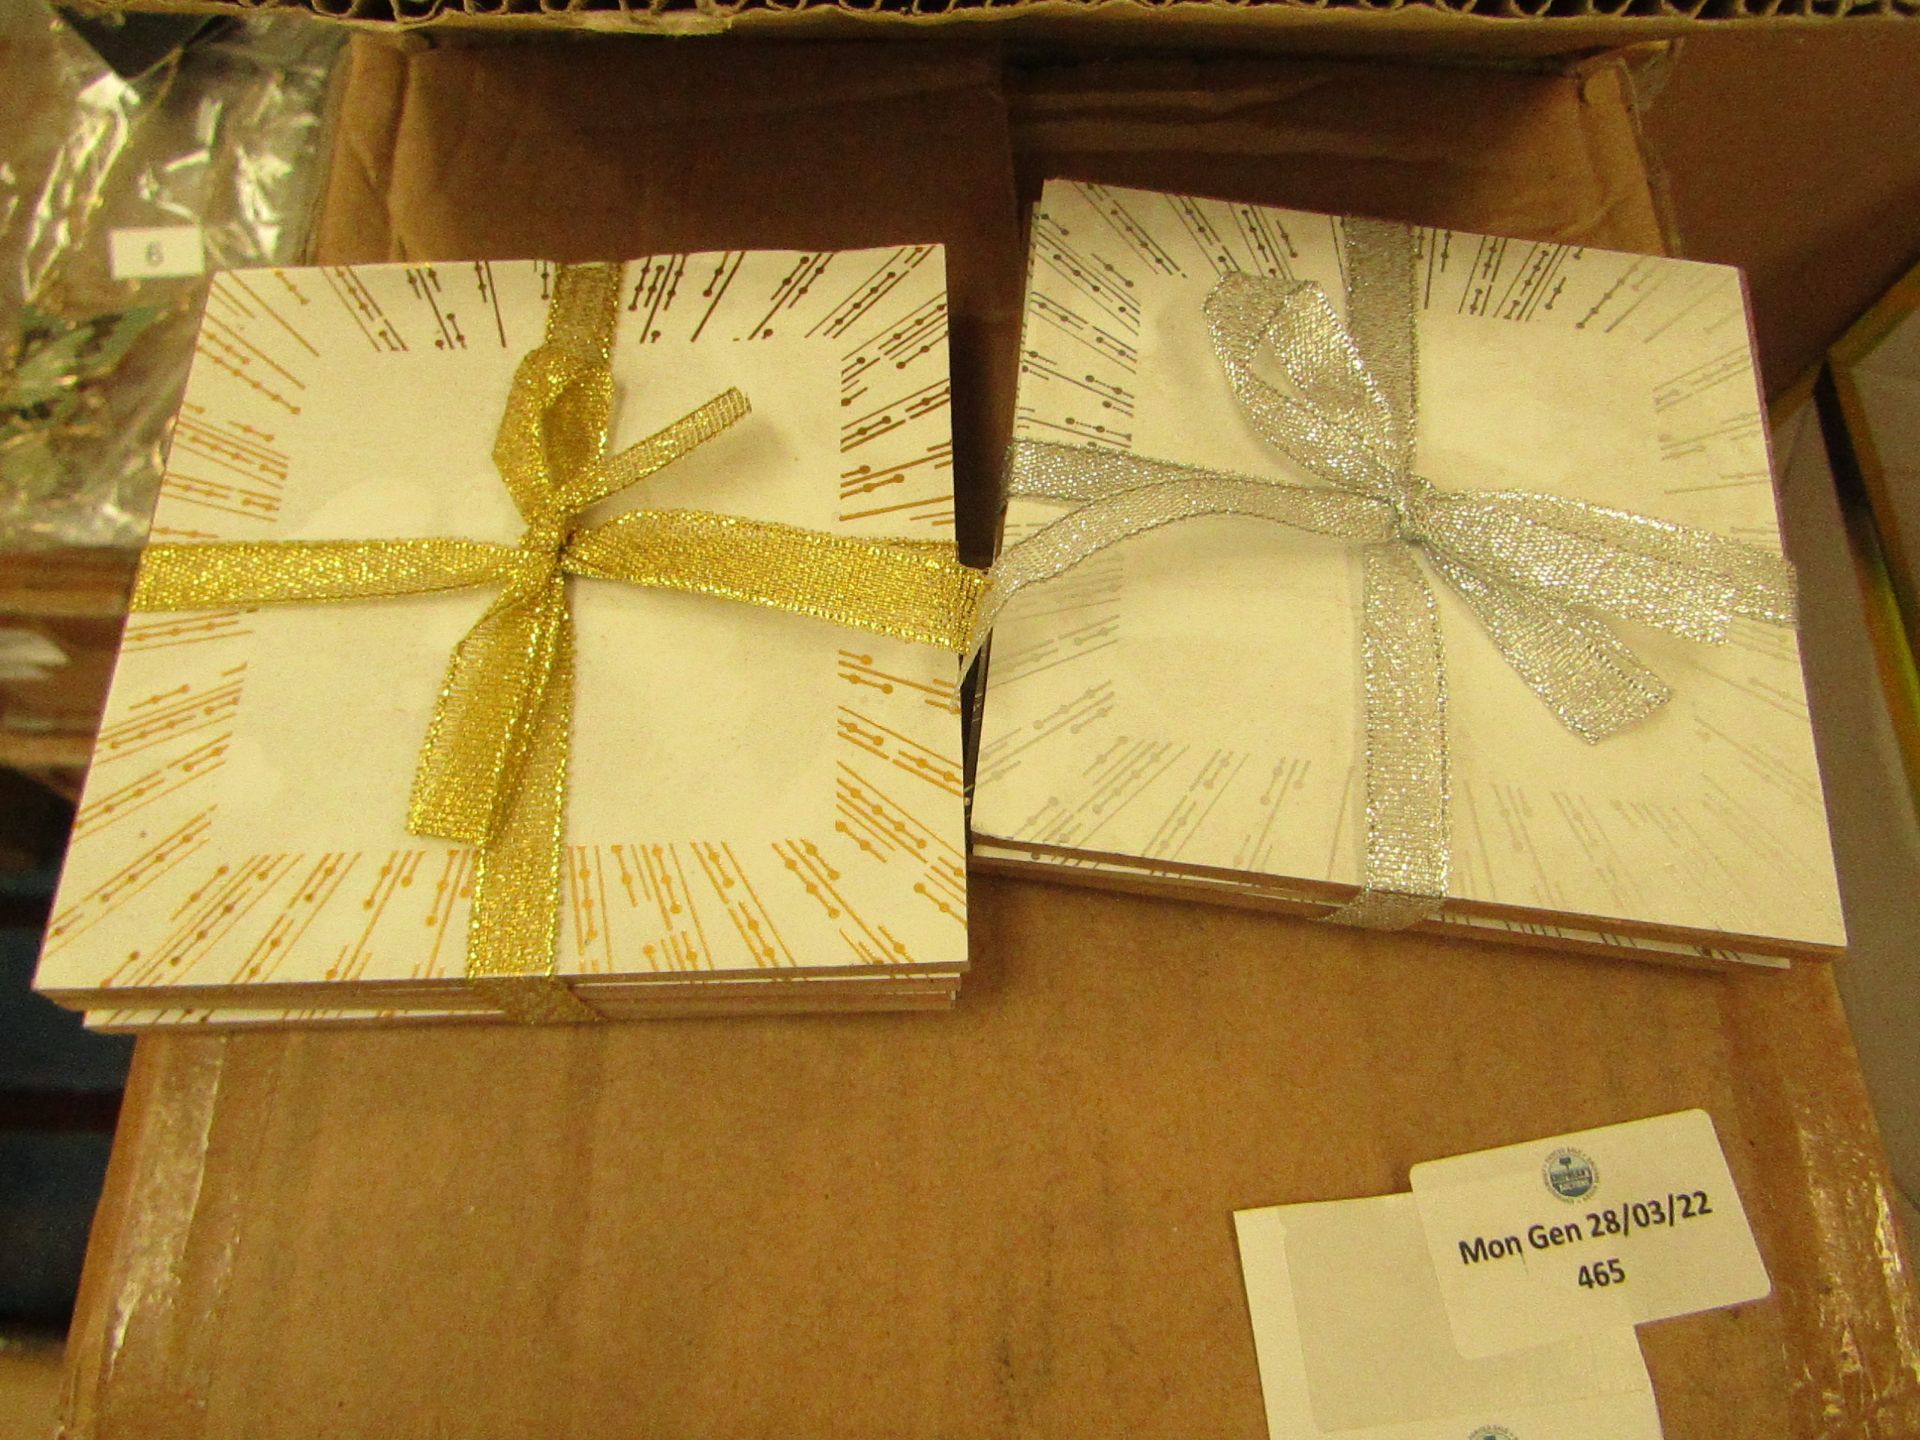 6x Boxes Containing : Glitter Coasters - Assortment Of 12+12 Gold & Silver - ( 24 Units Per